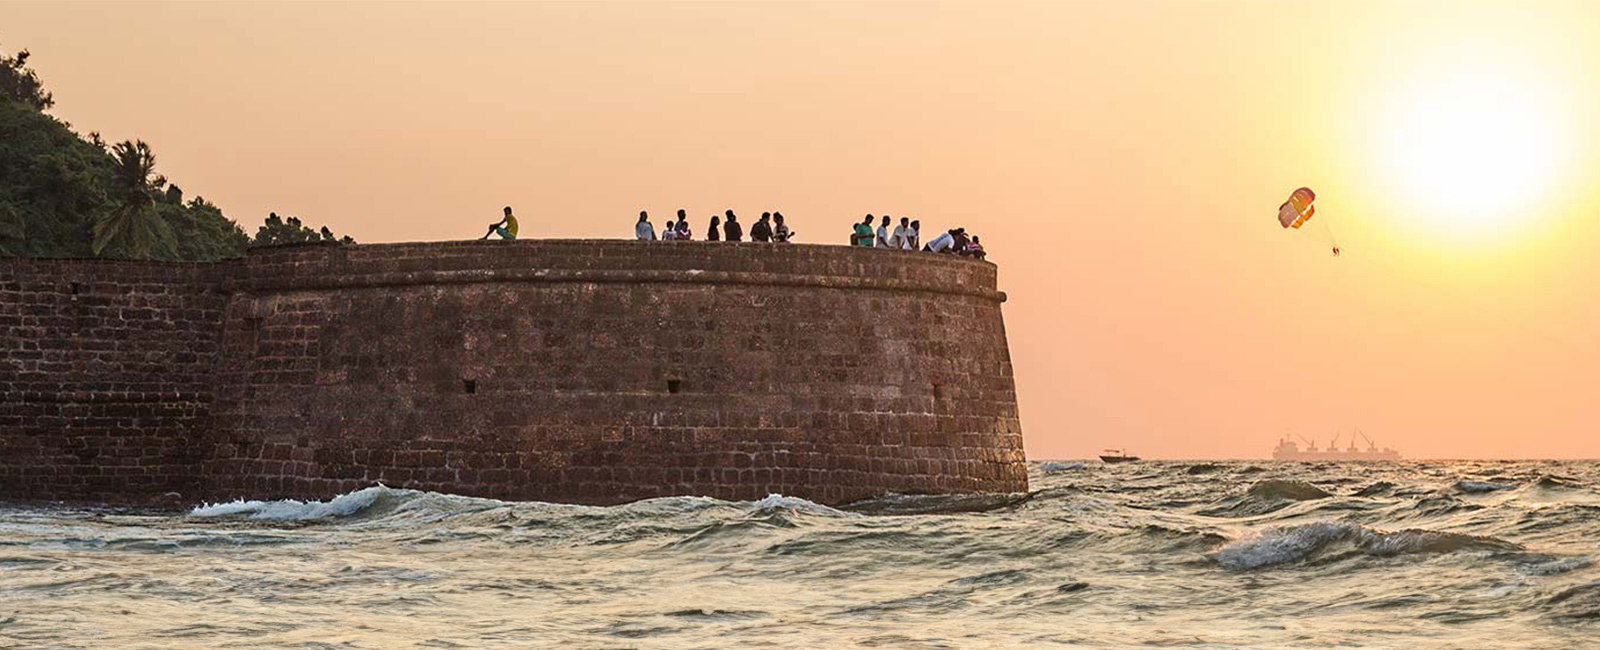 People enjoying sunset from the Aguada Fort in Goa